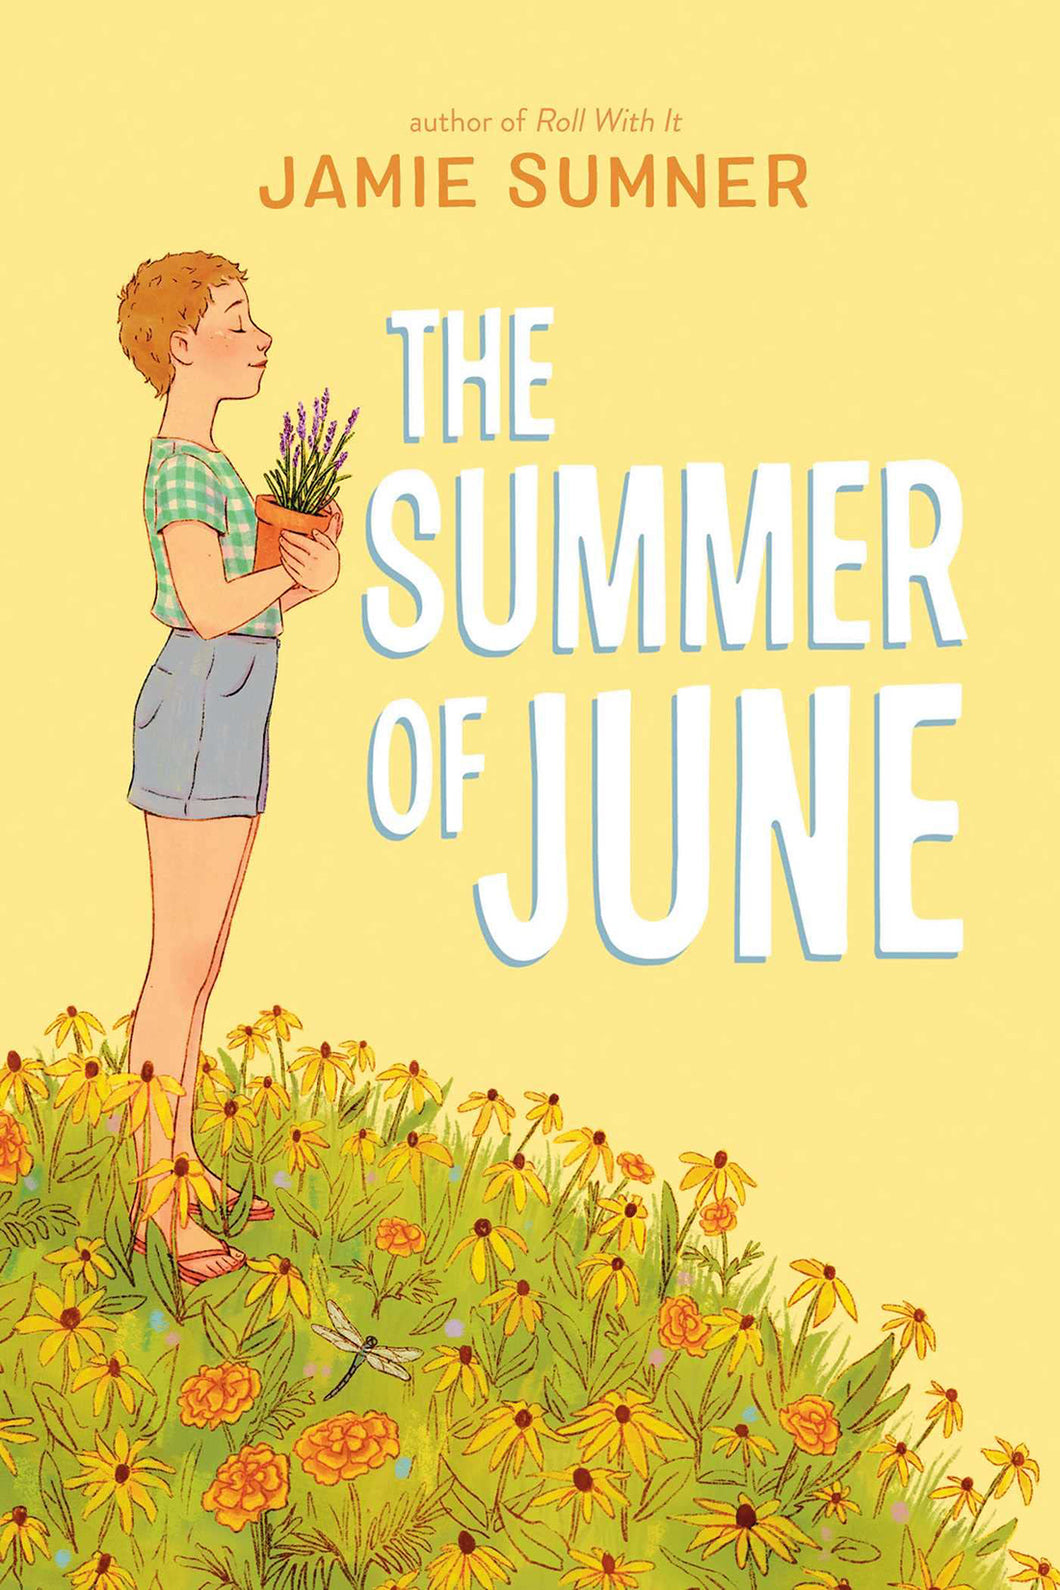 The Summer of June by Jamie Sumner / Hardcover or Paperback - NEW BOOK